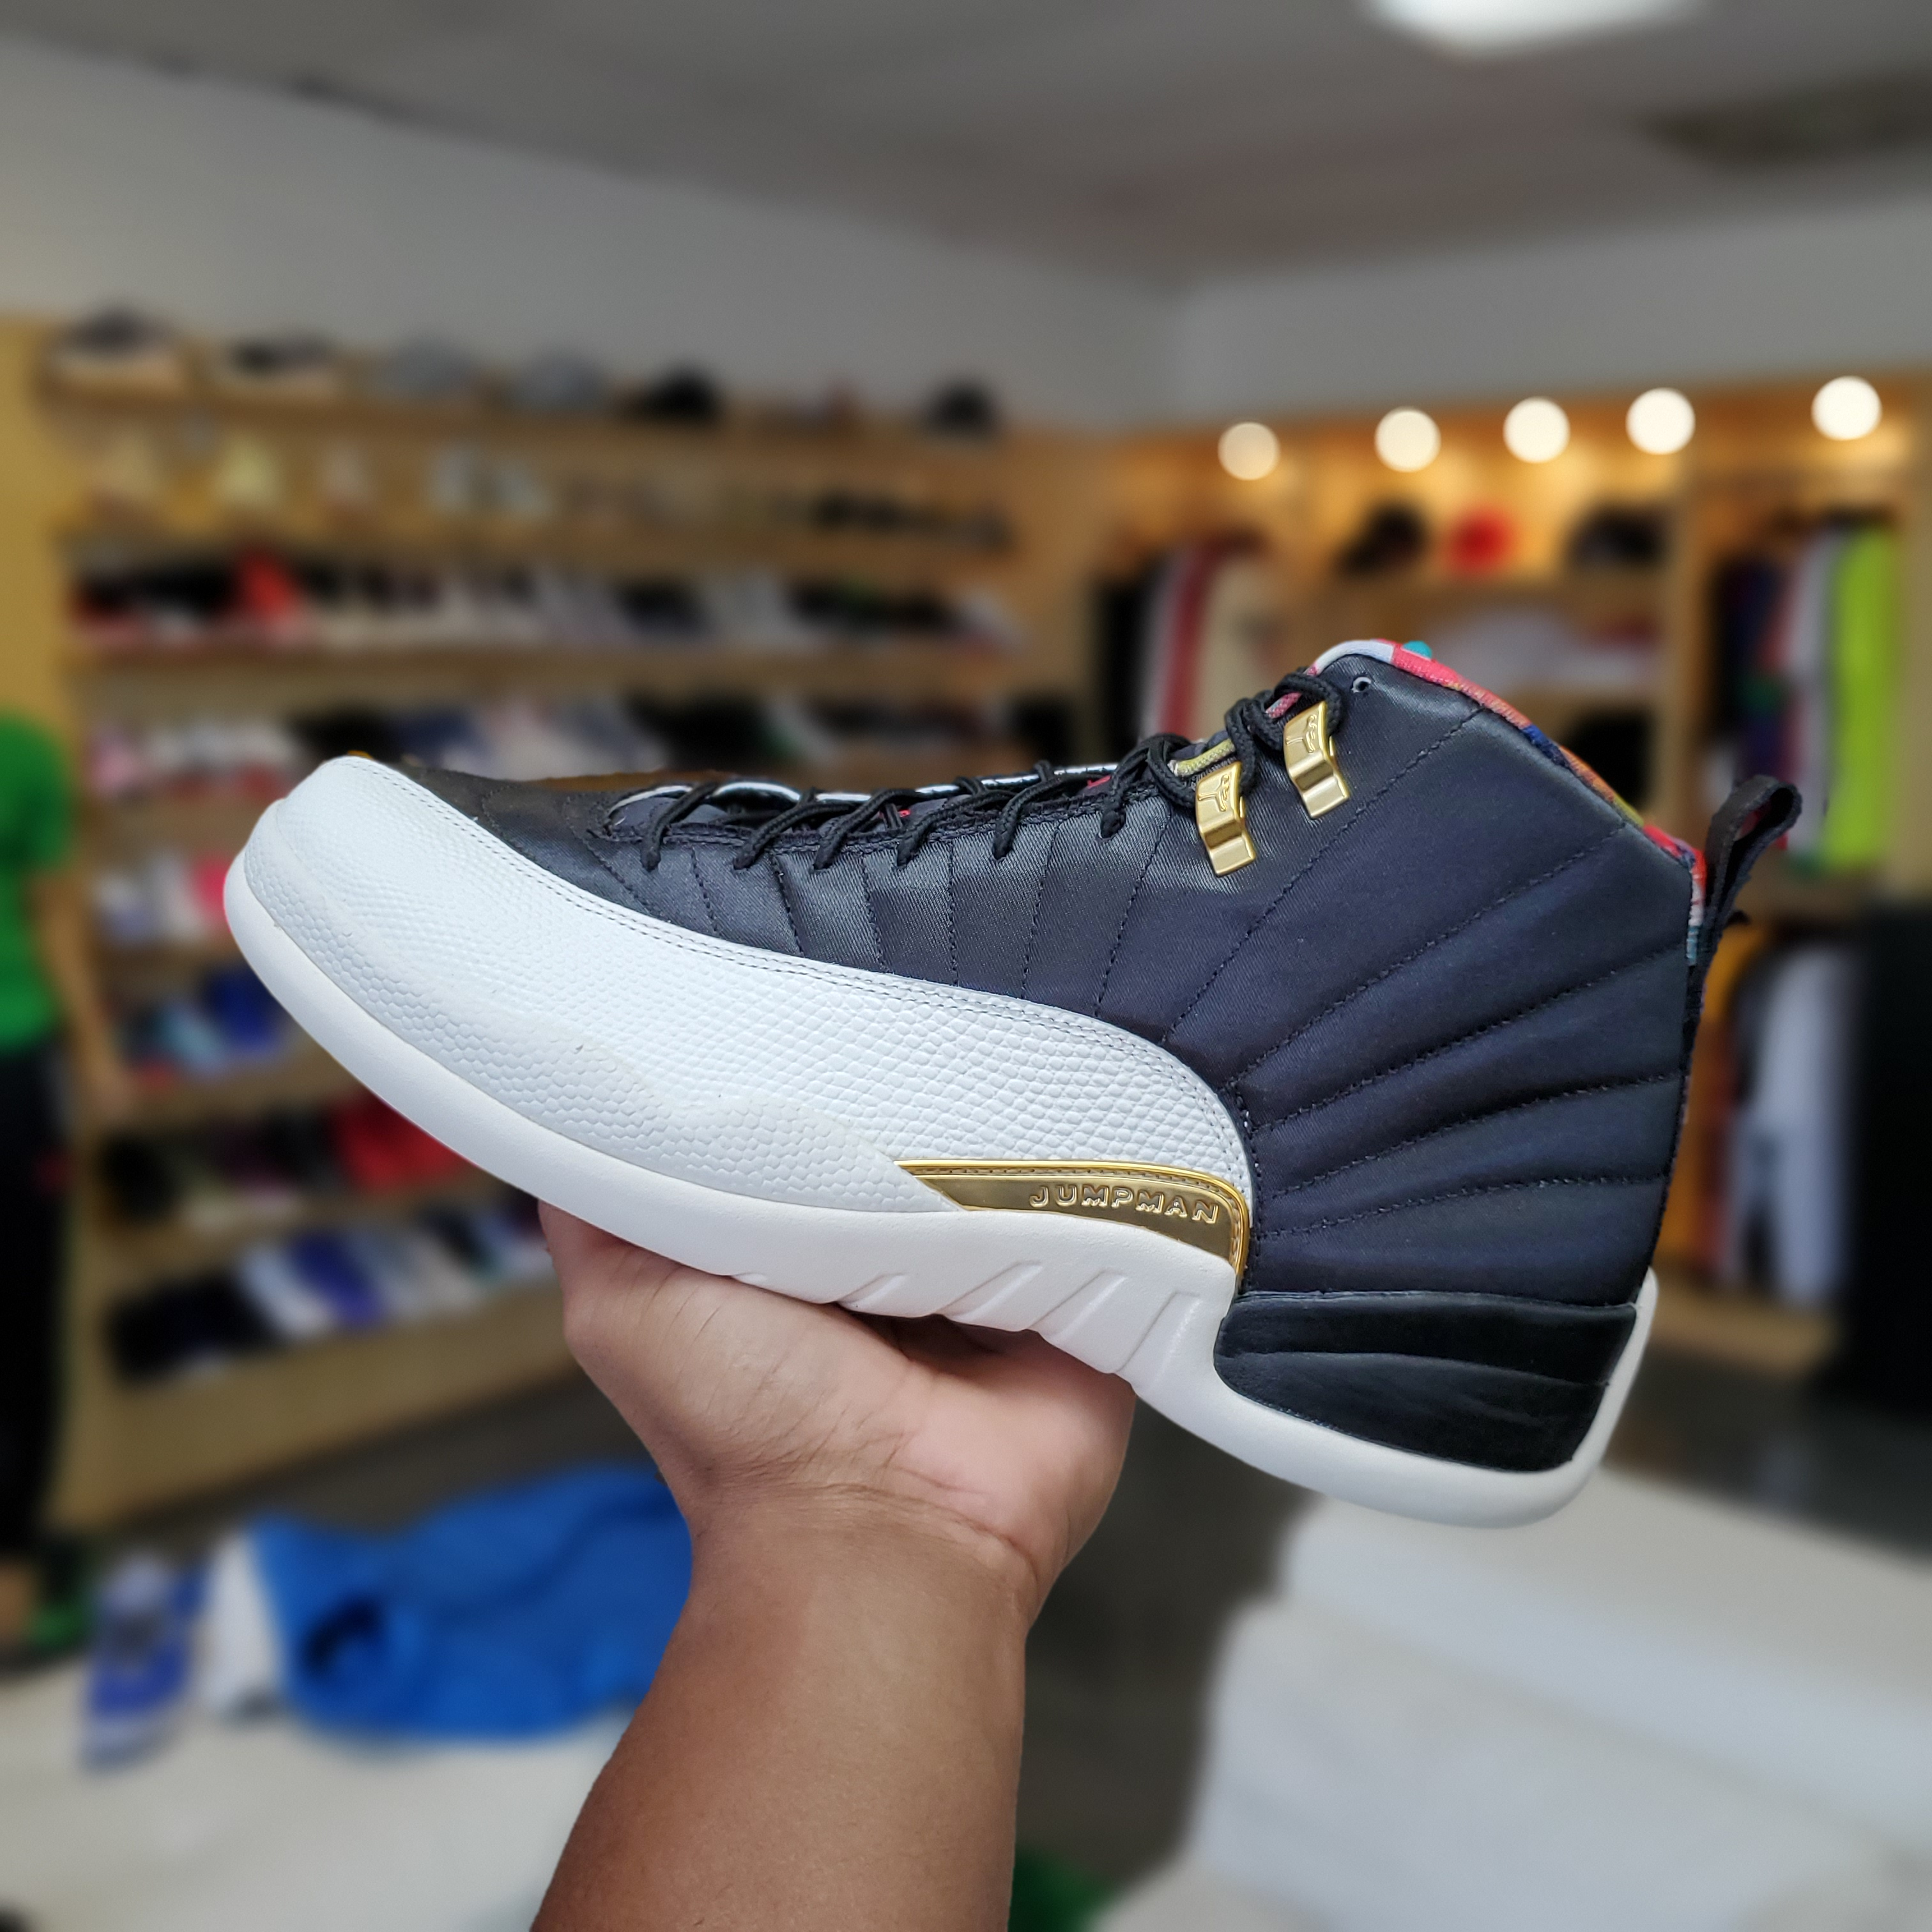 An Official Look at the Chinese New Year Air Jordan 12s